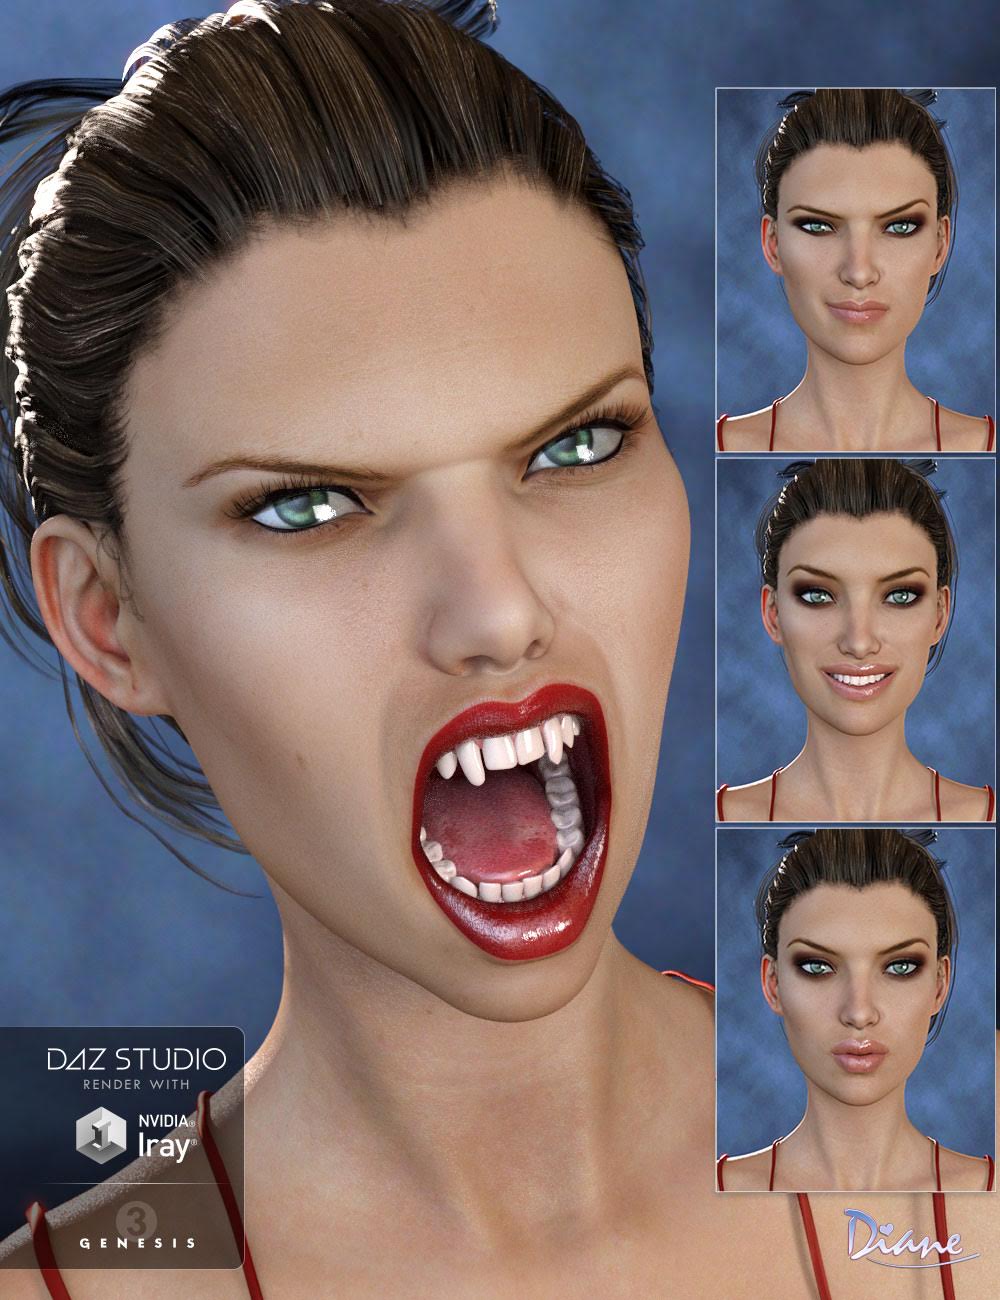 Avow Expressions for Arabella 7 and Genesis 3 Female(s) by: Diane, 3D Models by Daz 3D